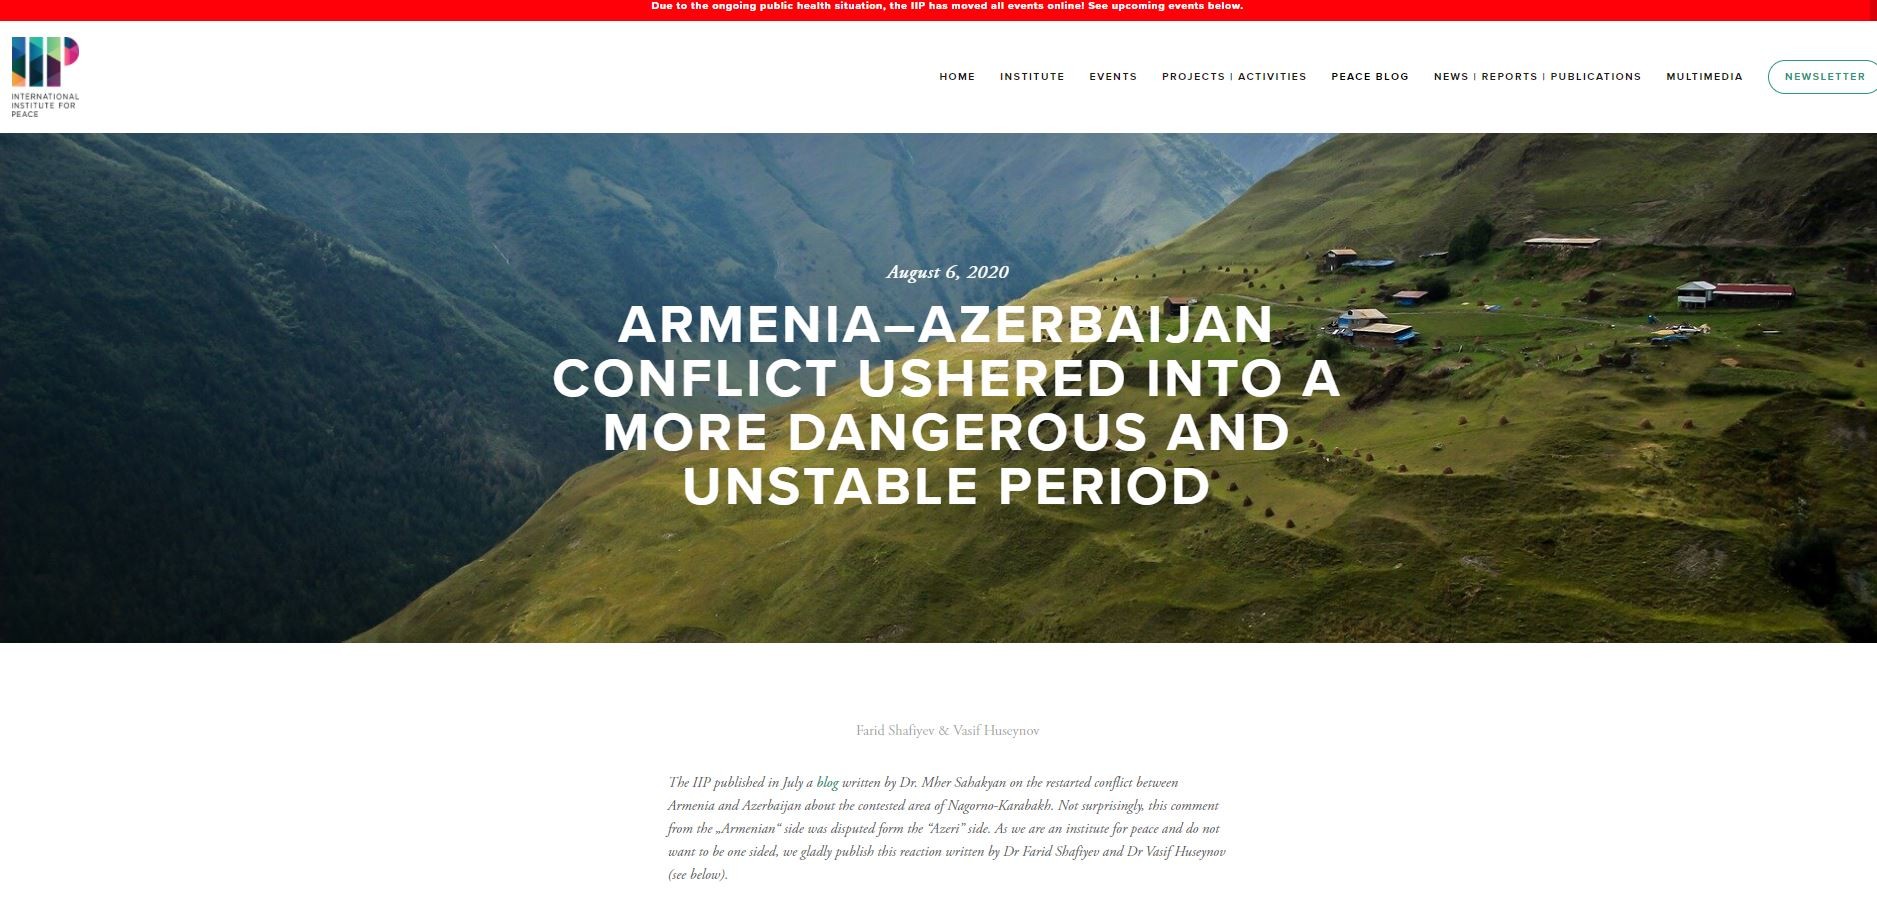 Armenia–Azerbaijan conflict ushered into a more dangerous and unstable period